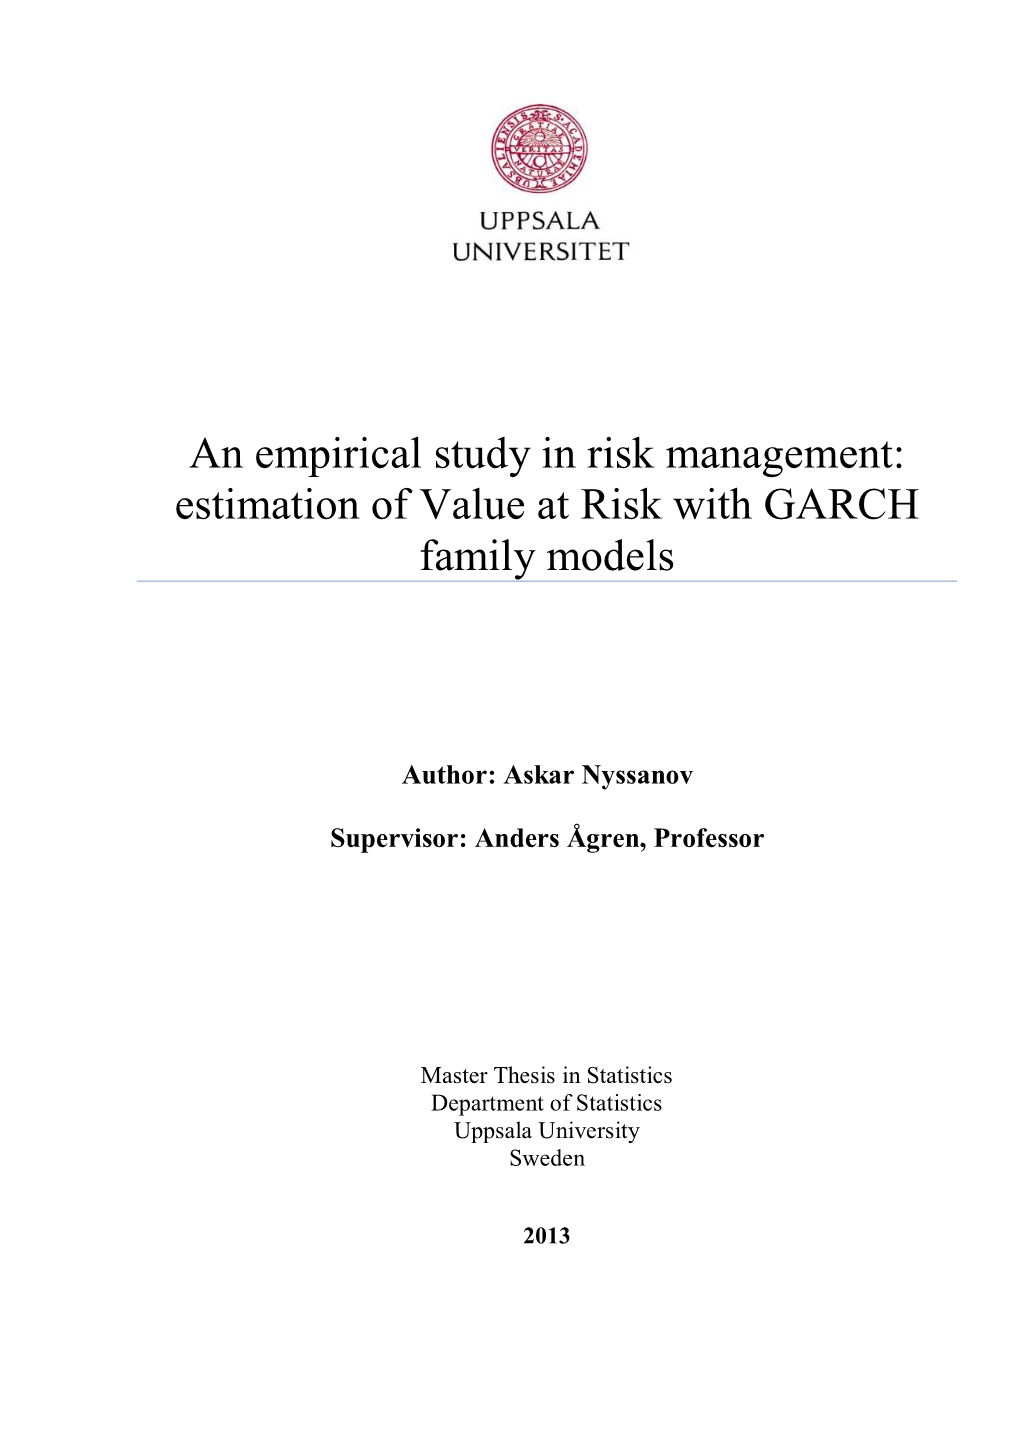 Estimation of Value at Risk with GARCH Family Models